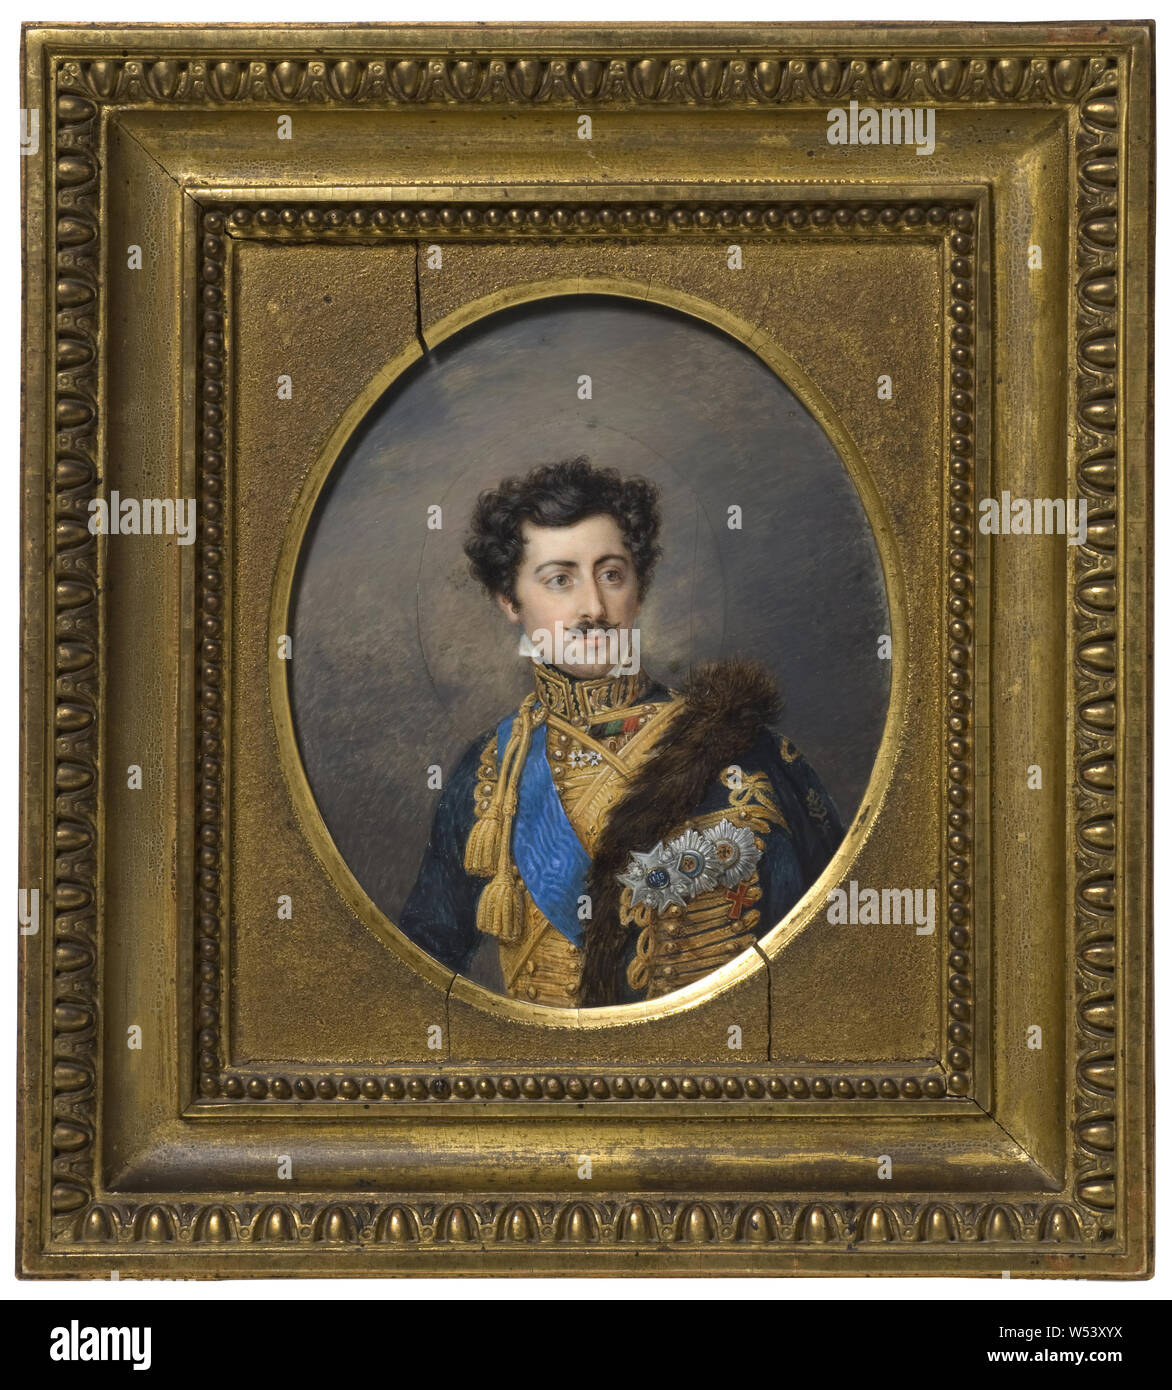 Lorentz Svensson Sparrgren, King Oskar I, Oscar I as Crown Prince, painting, Oscar I of Sweden, Watercolor on ivory, Oval, Height, 17 cm (6.6 inches), Width, 14.5 cm (5.7 inches) Stock Photo